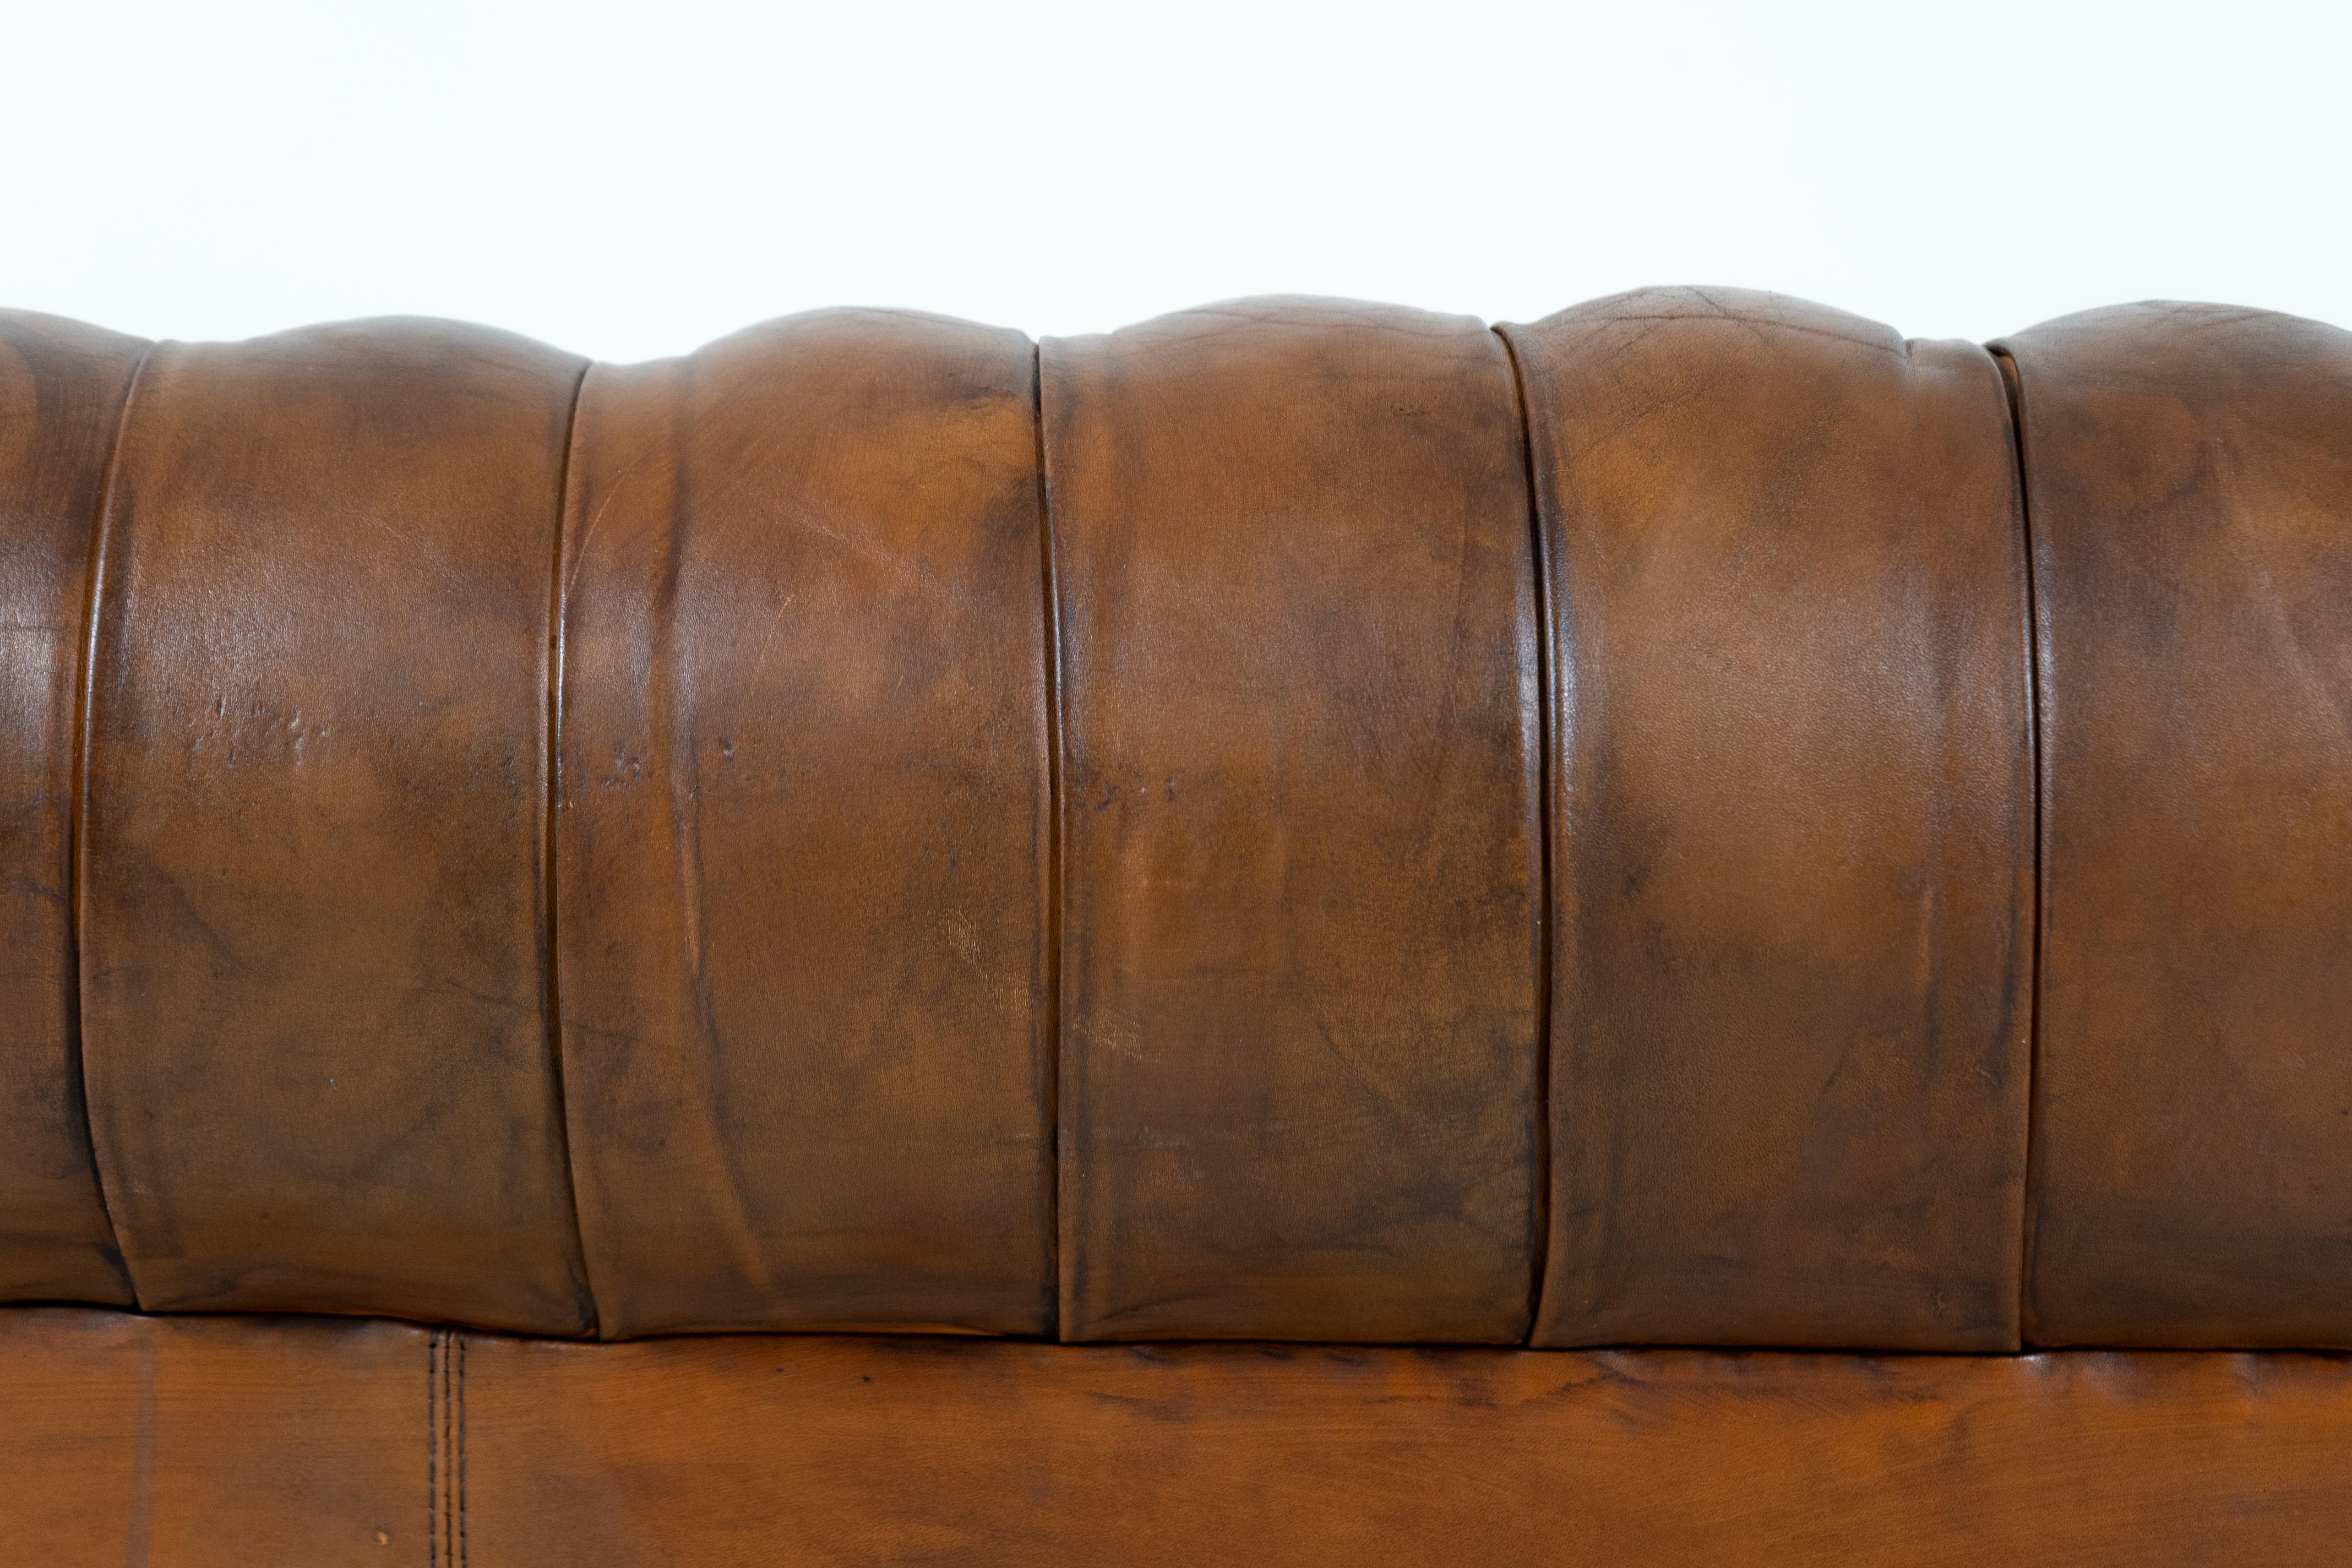 A Vintage Chesterfield Leather Sofa, France c.1960 For Sale 3